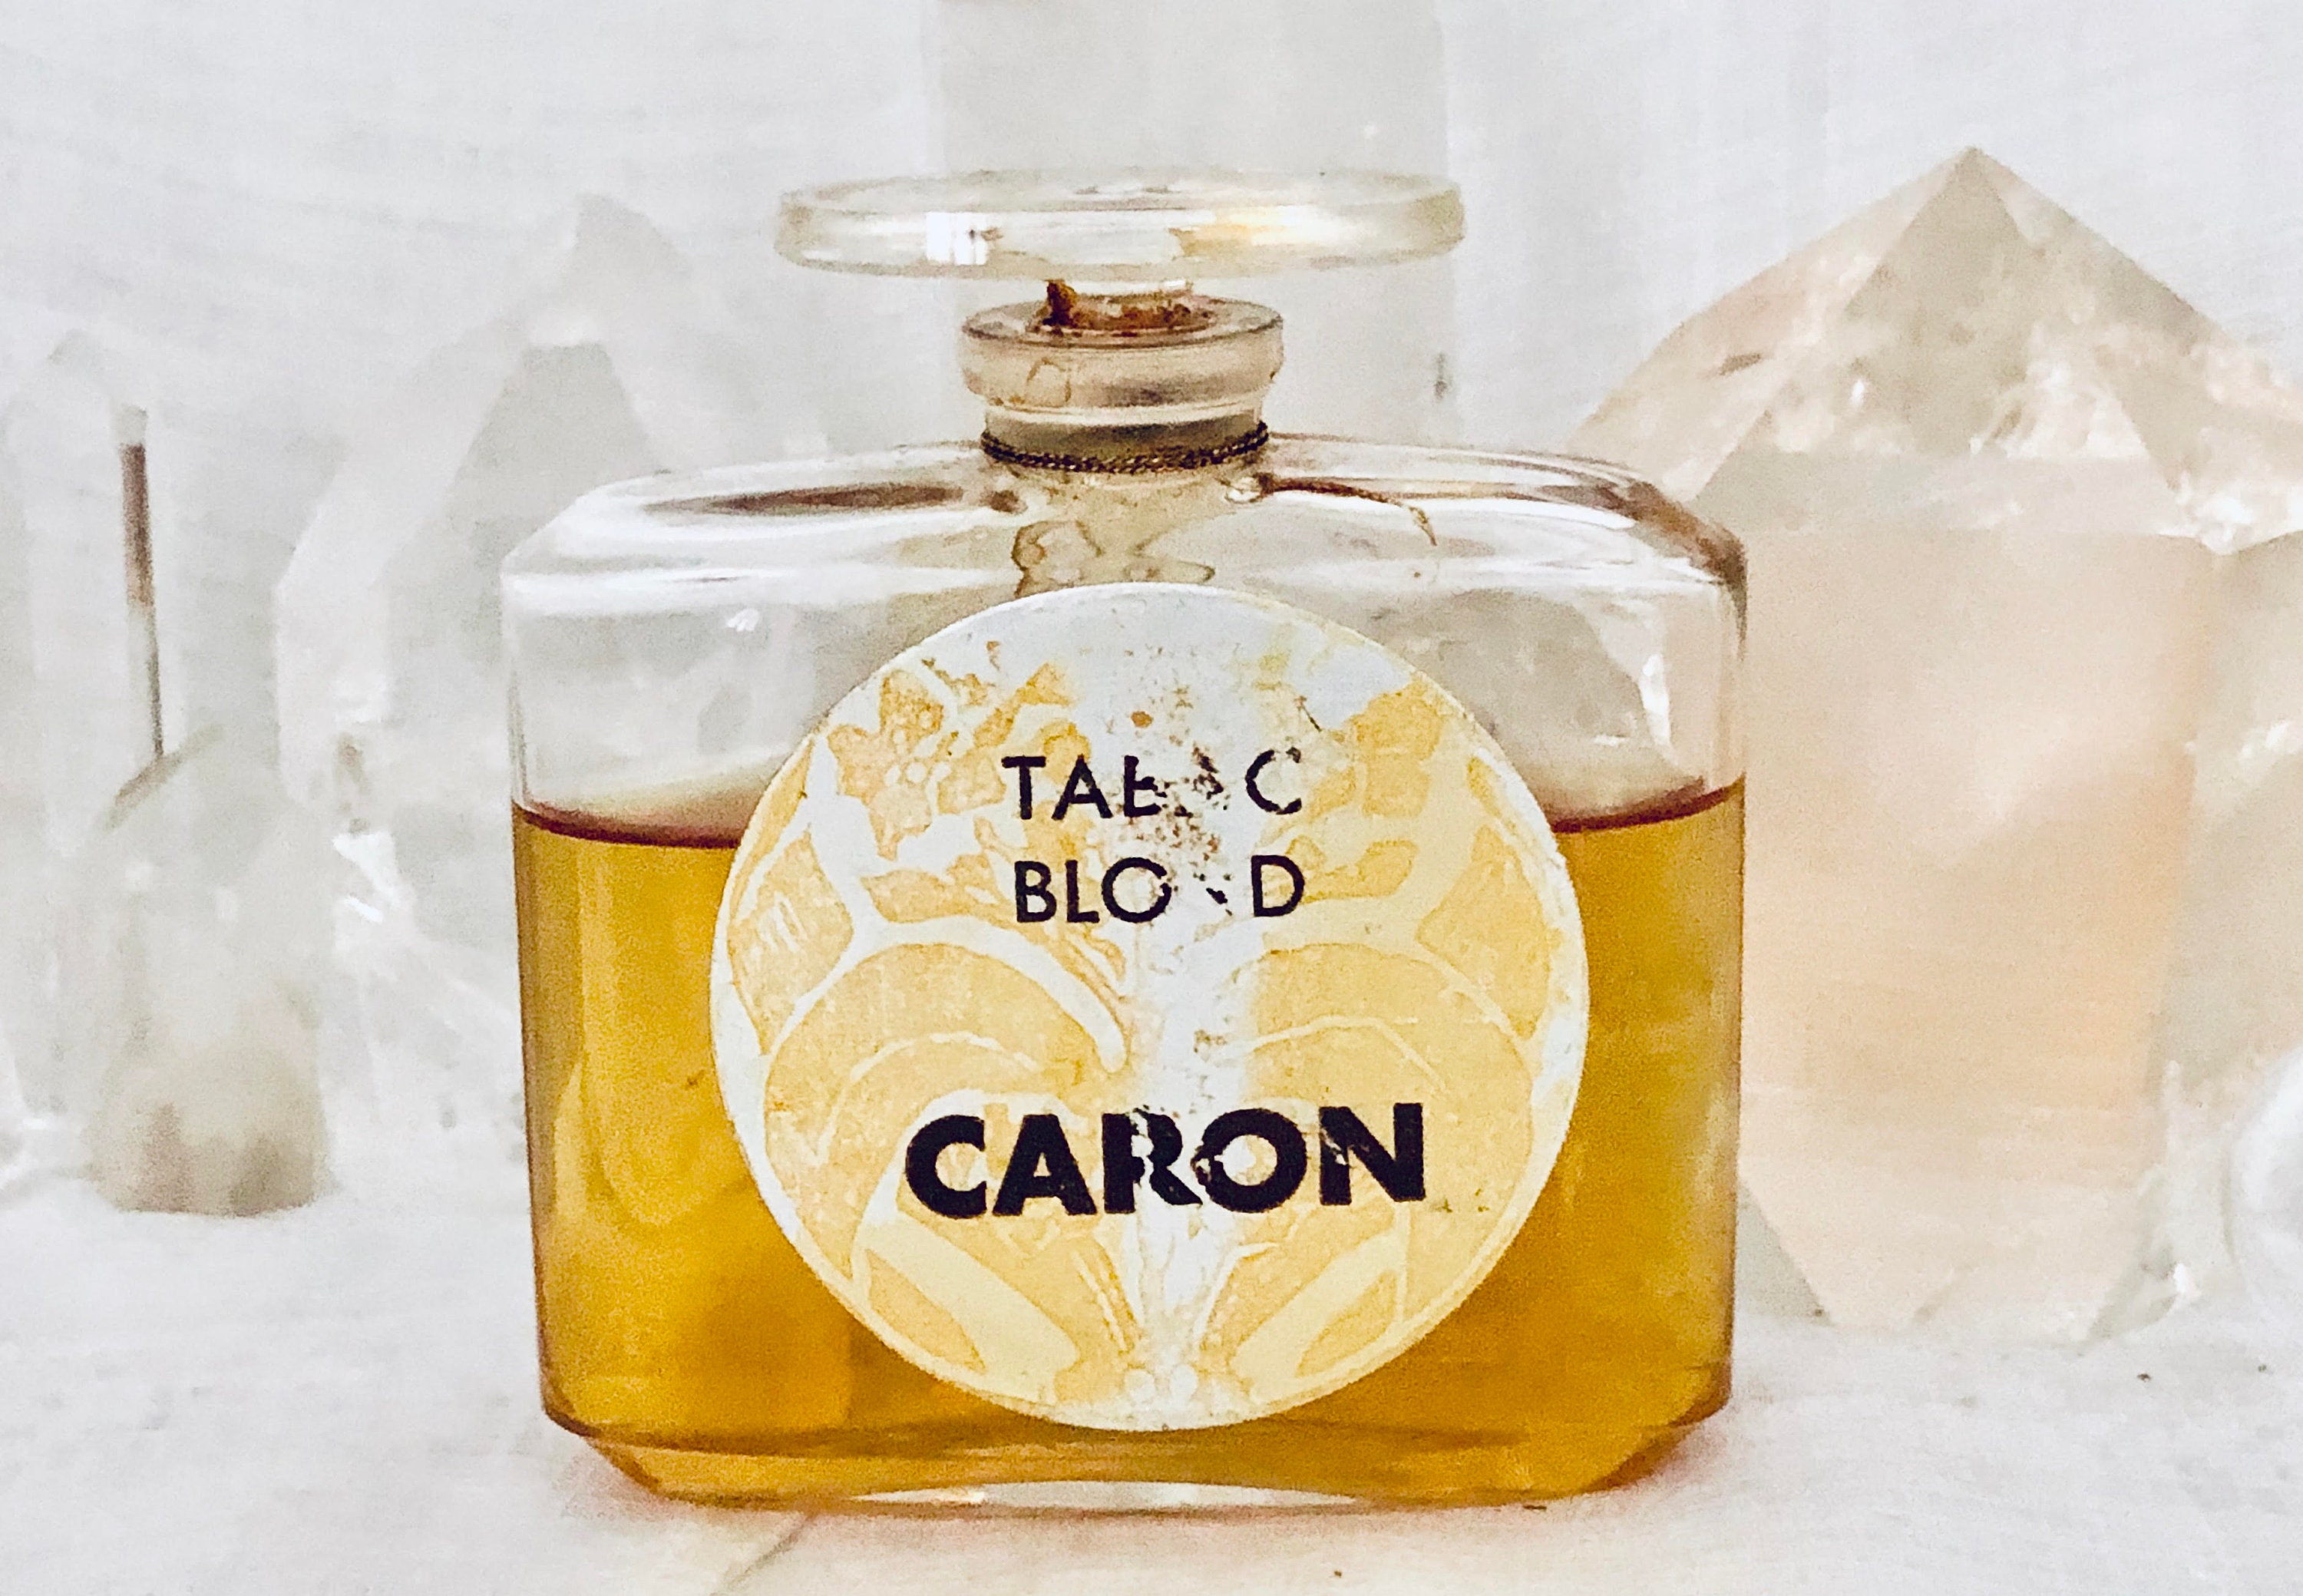 Caron Tabac Blond 'Blond Tobacco' DECANTED SAMPLE - Etsy 日本